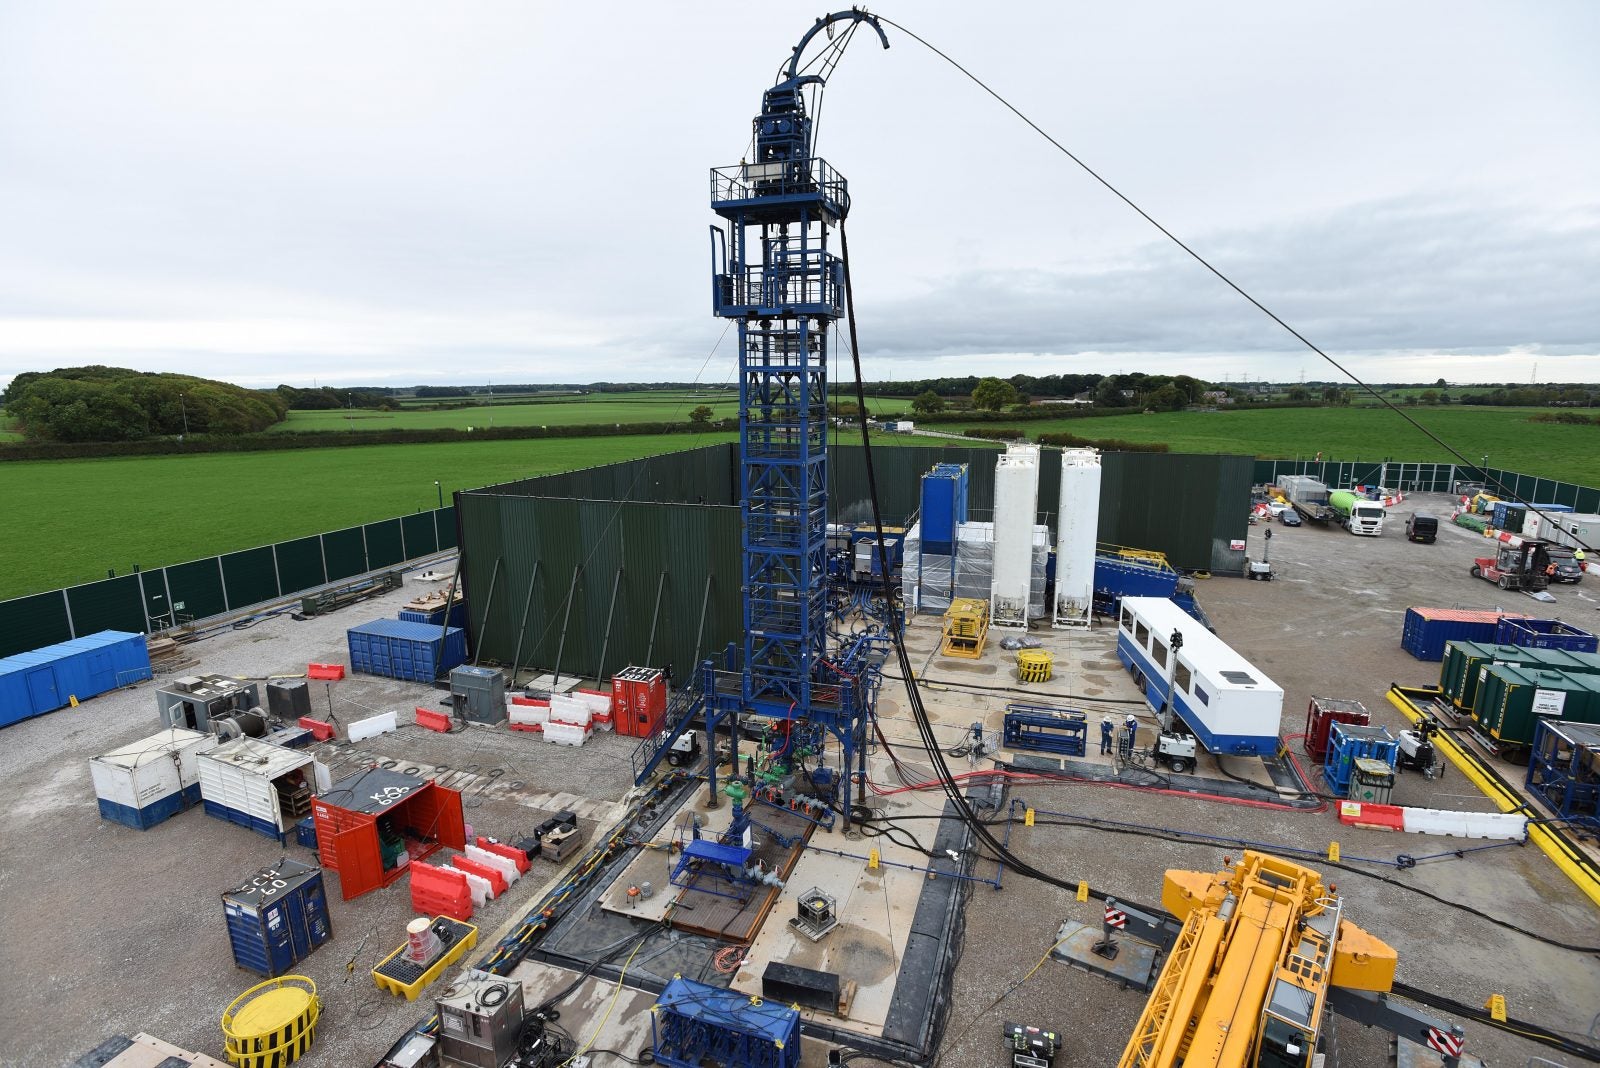 Under pressure from some Tory MPs, it was suggested two Cuadrilla sites in Lancashire may be handed over to the British Geological Survey rather than being concreted over (Cuadrilla/PA)